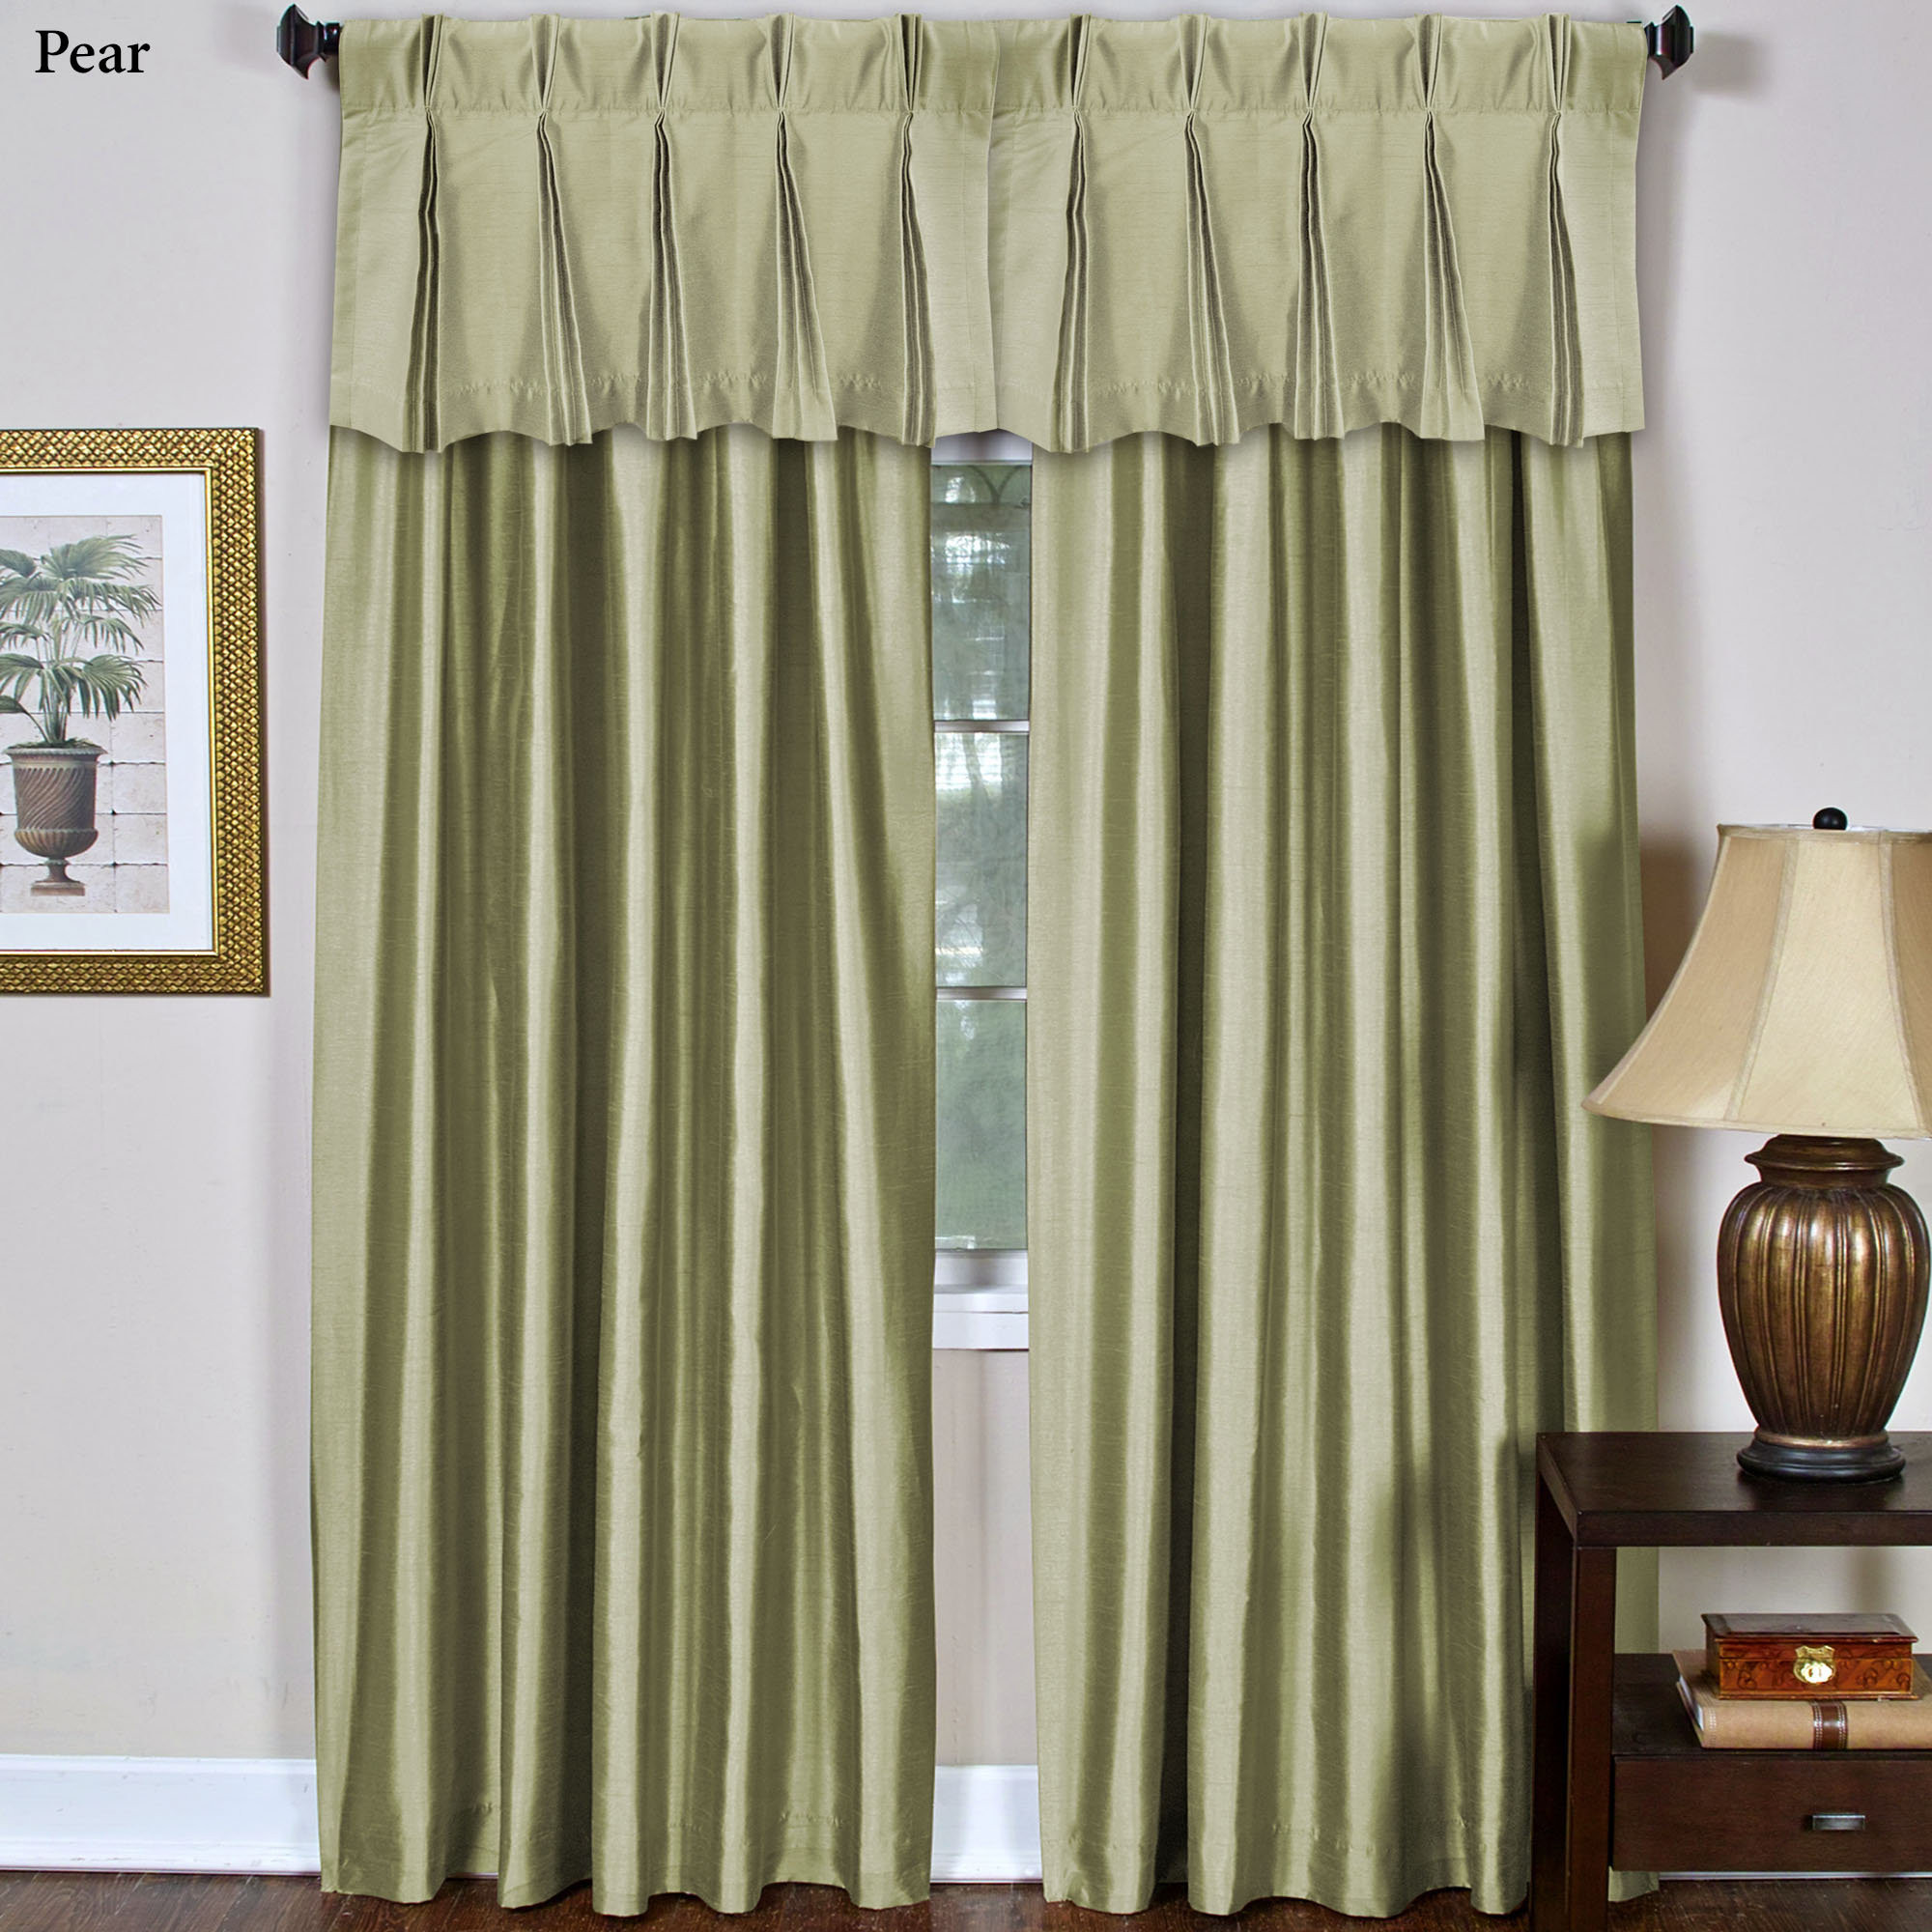 Jcpenney Living Room Curtains
 Curtain Adorable Jcpenney Window Curtains For Beautiful